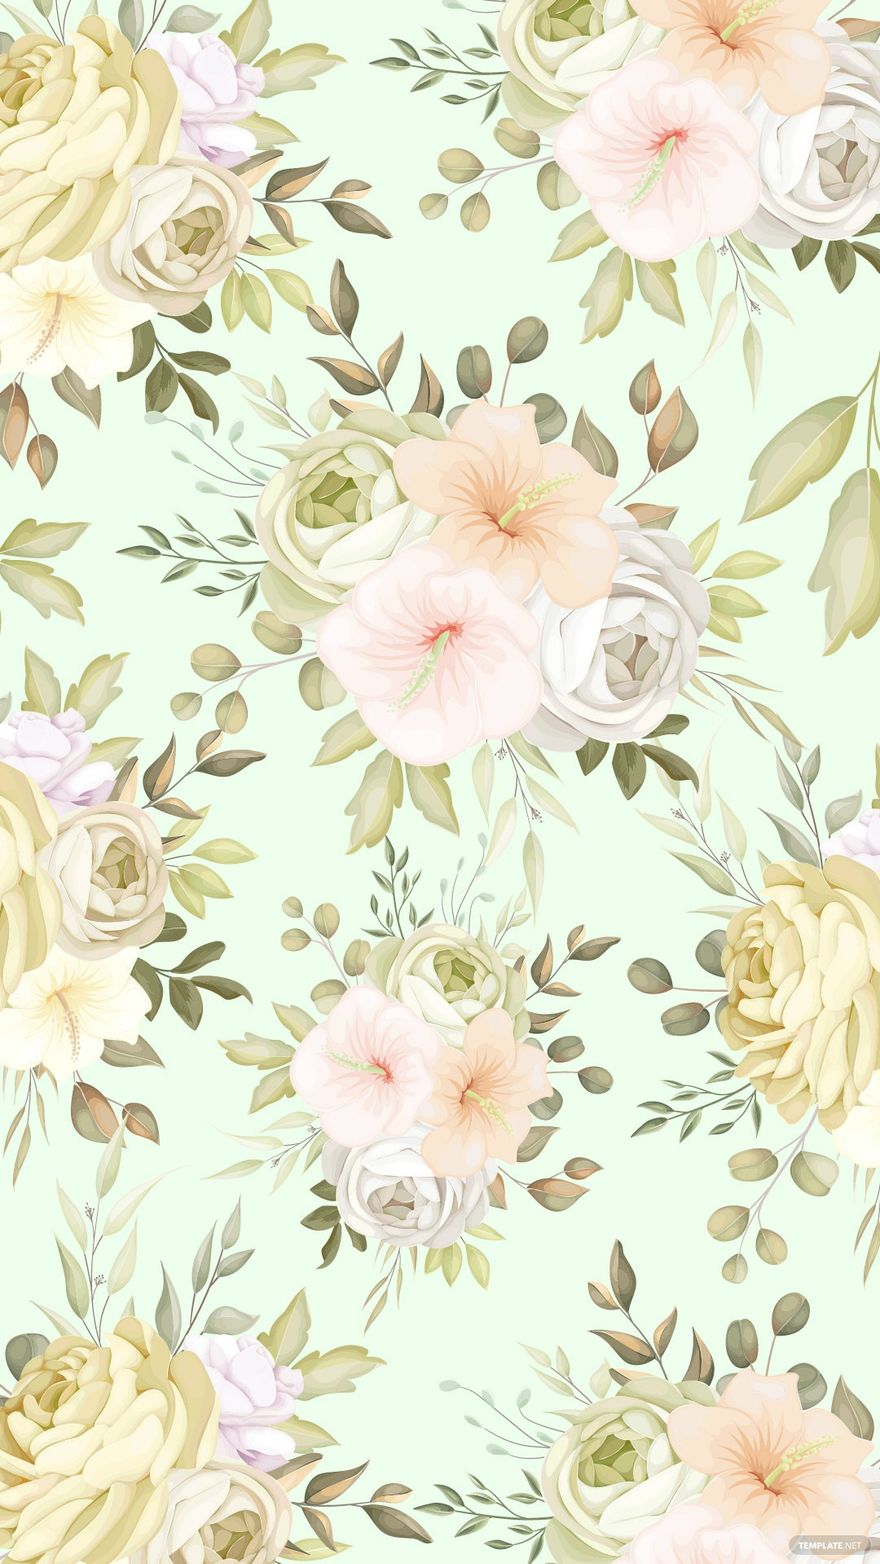 Free Fall Floral Watercolor Background in Illustrator, EPS, SVG, JPG